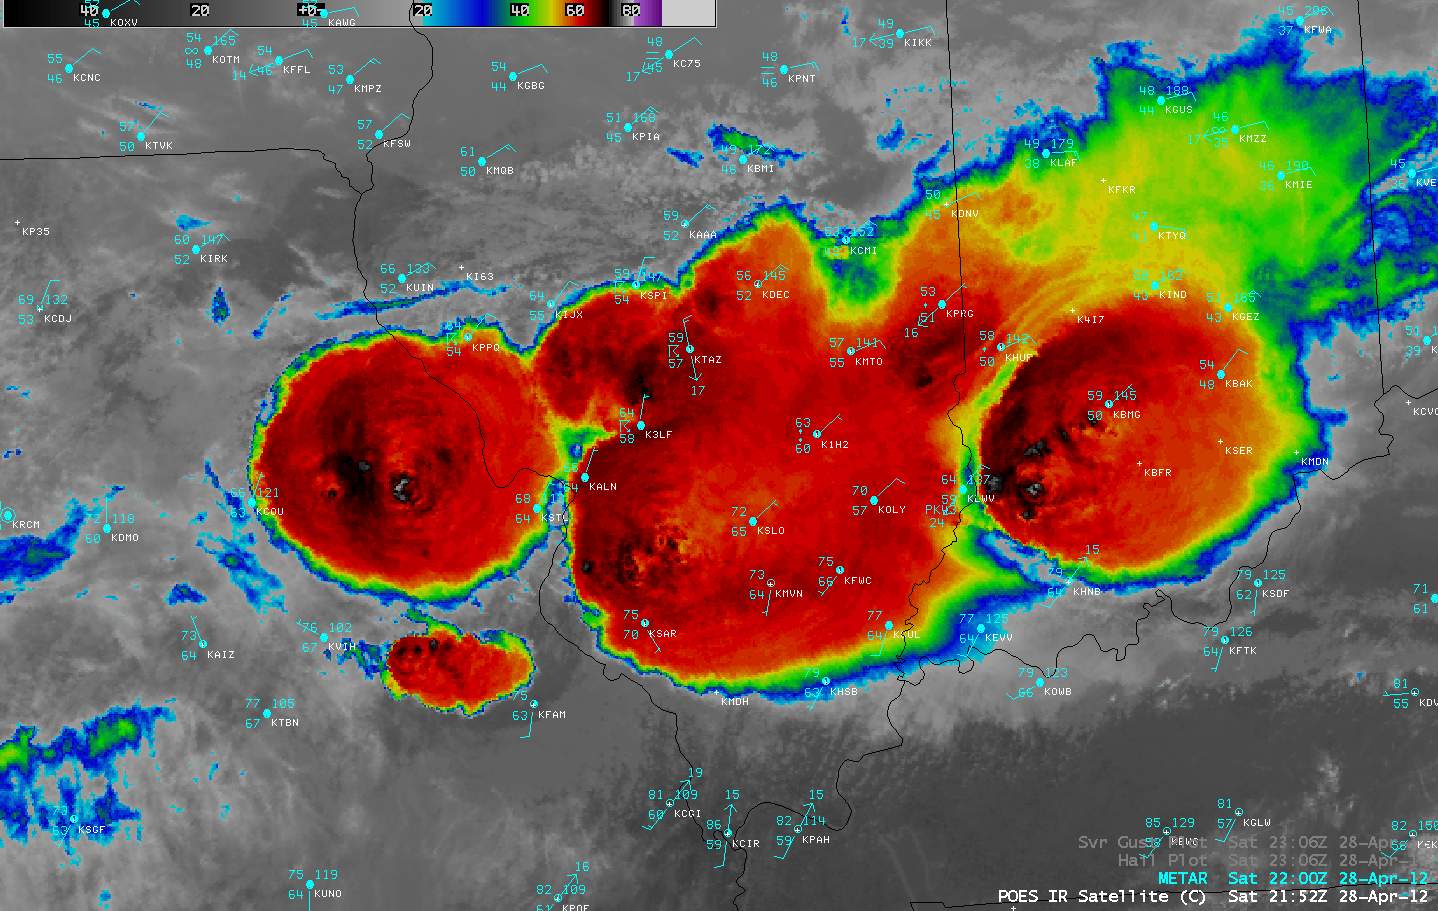 POES AVHRR 10.8 Âµm IR image + cumulative SPC storm reports of hail and  wind gusts